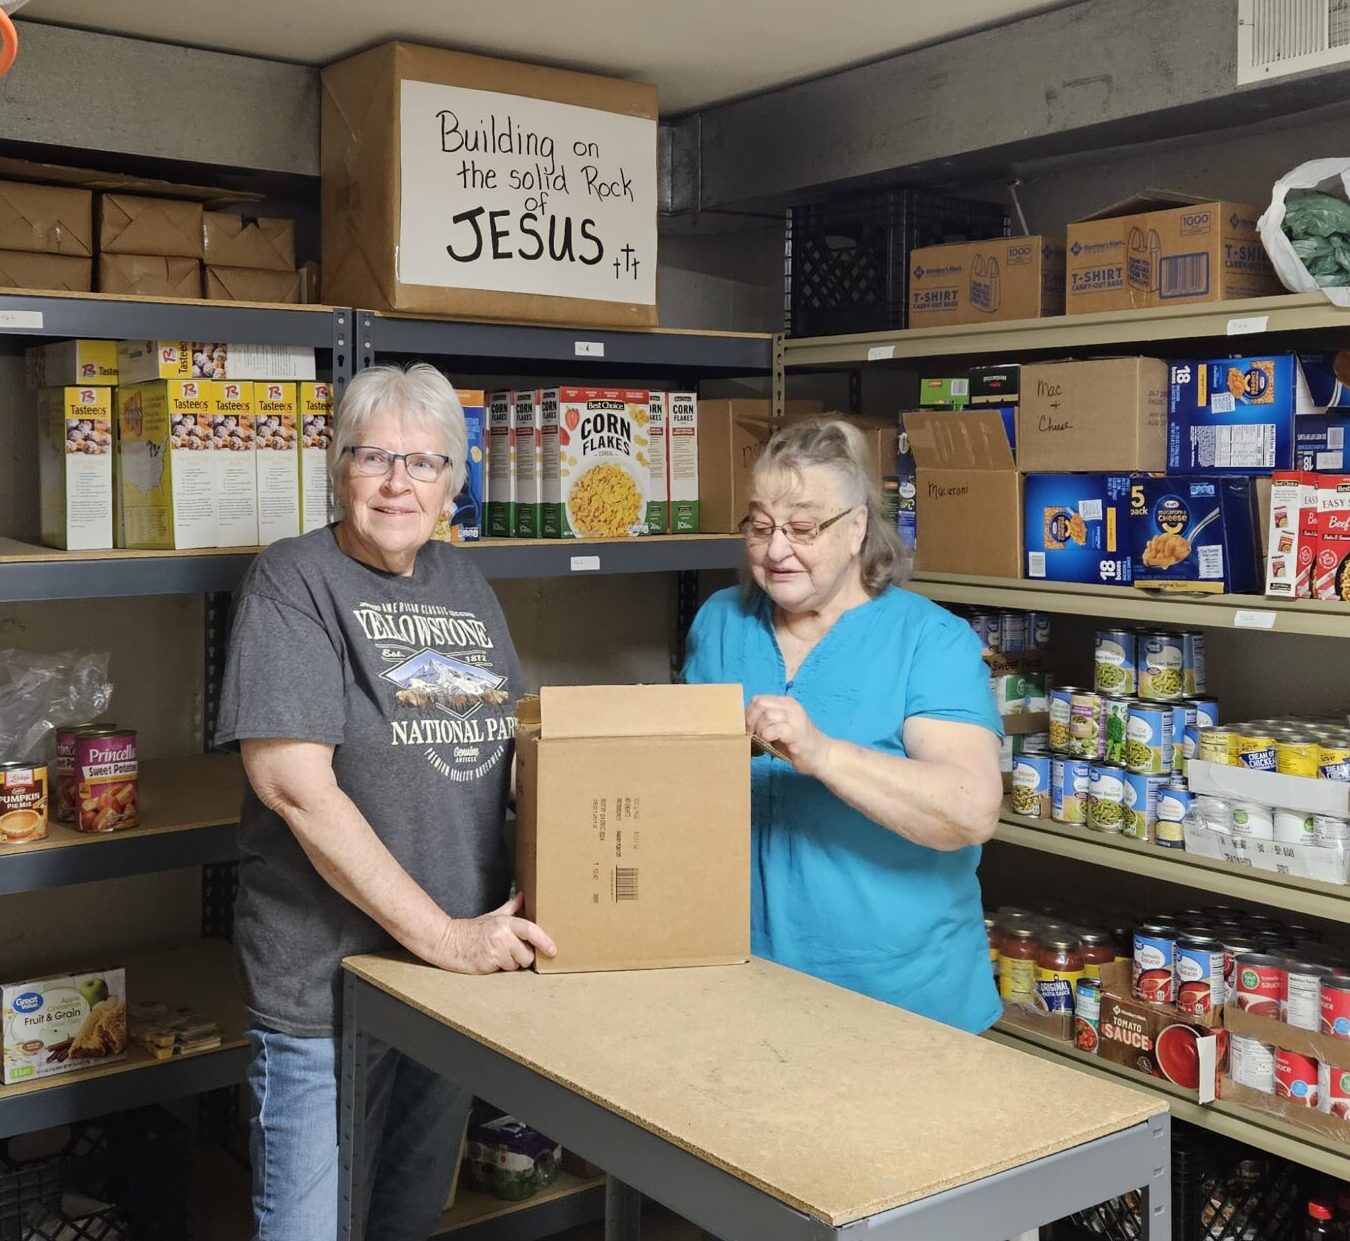 Volunteers are welcome at the New Hope Food Pantry!